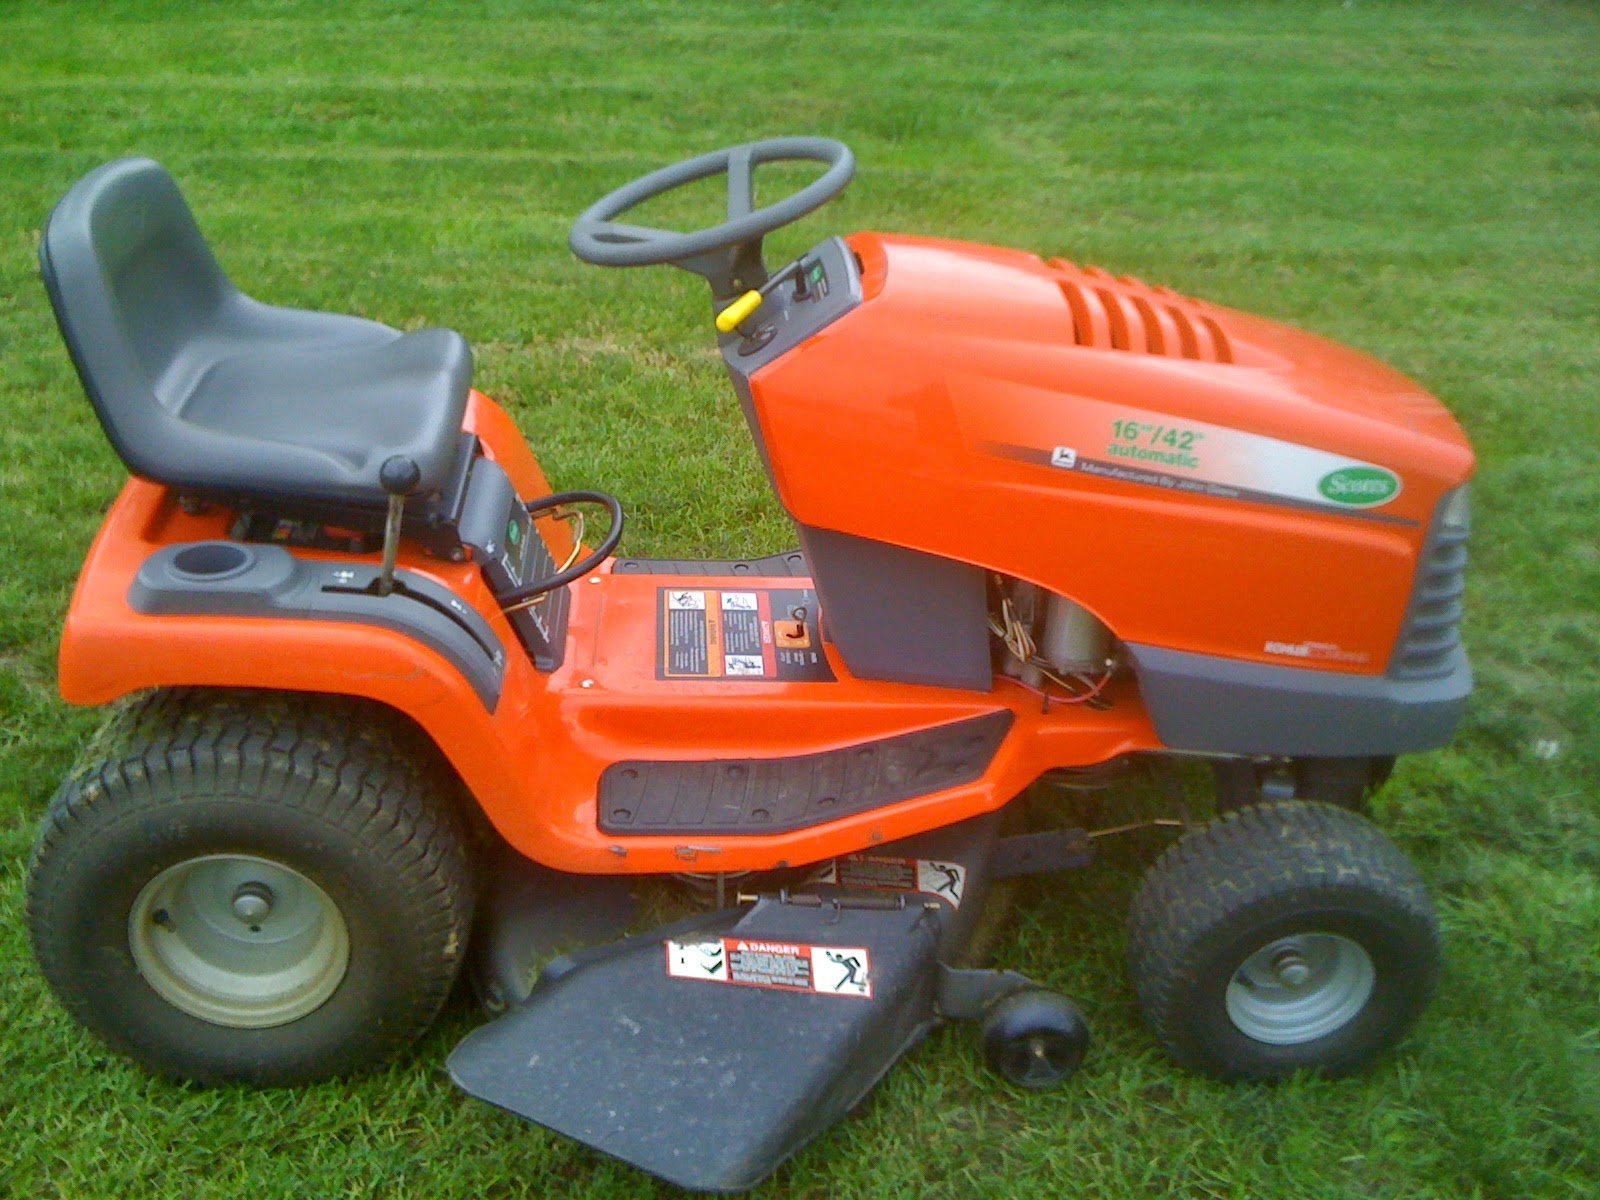 Free Removal of Unwanted Riding Mowers, Cycles, ATV